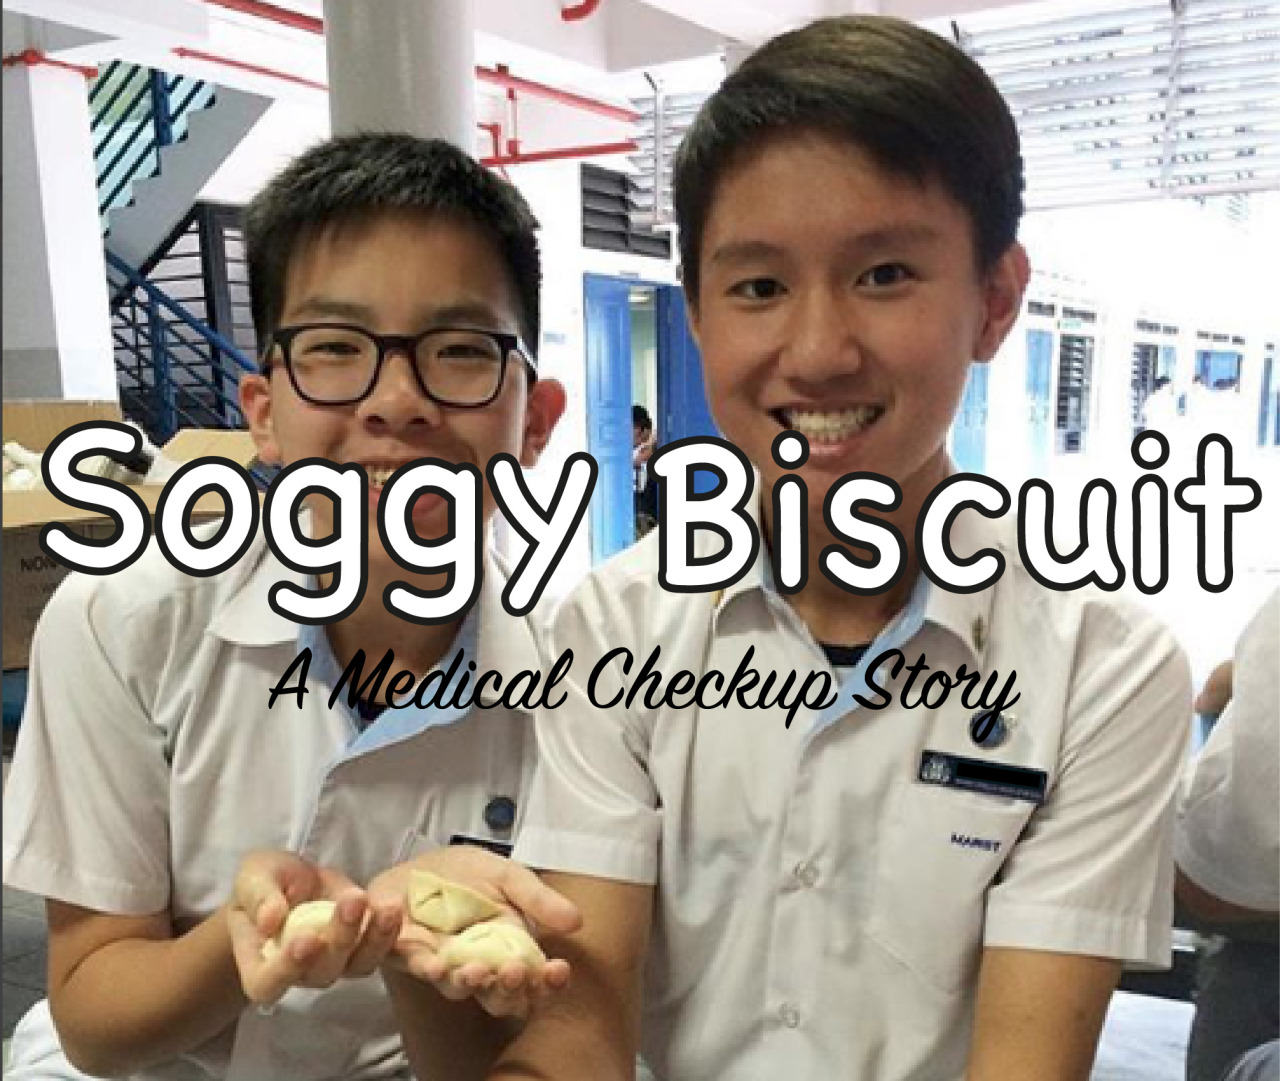 Medical Checkup: Soggy Biscuit